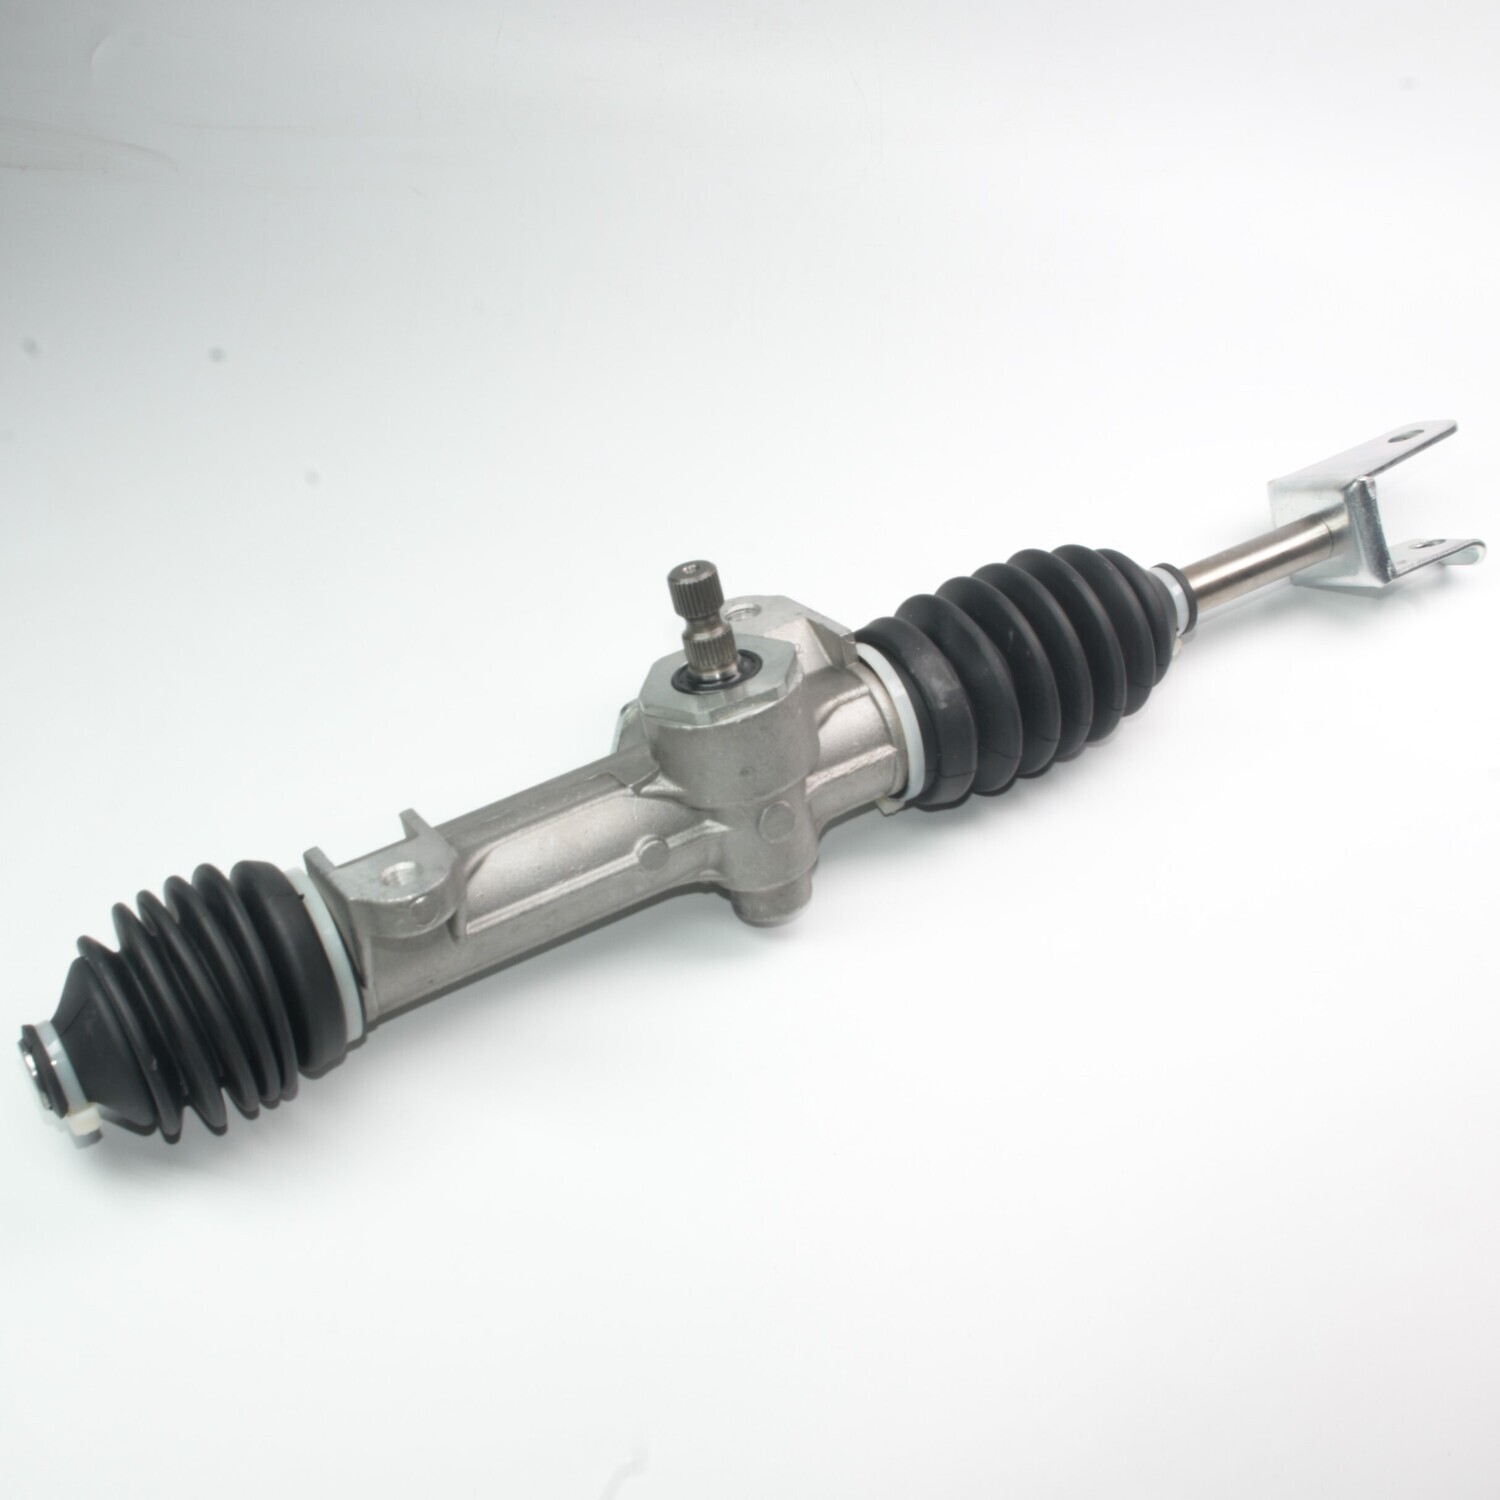 Steering Rack and Pinion Assembly Fits Suzuki Carry DA41T​ DA51T DA71T DB41T DB51T DB71T Every DA41V DA51V DA71V DB41V DB51V DB71V F5A F6A